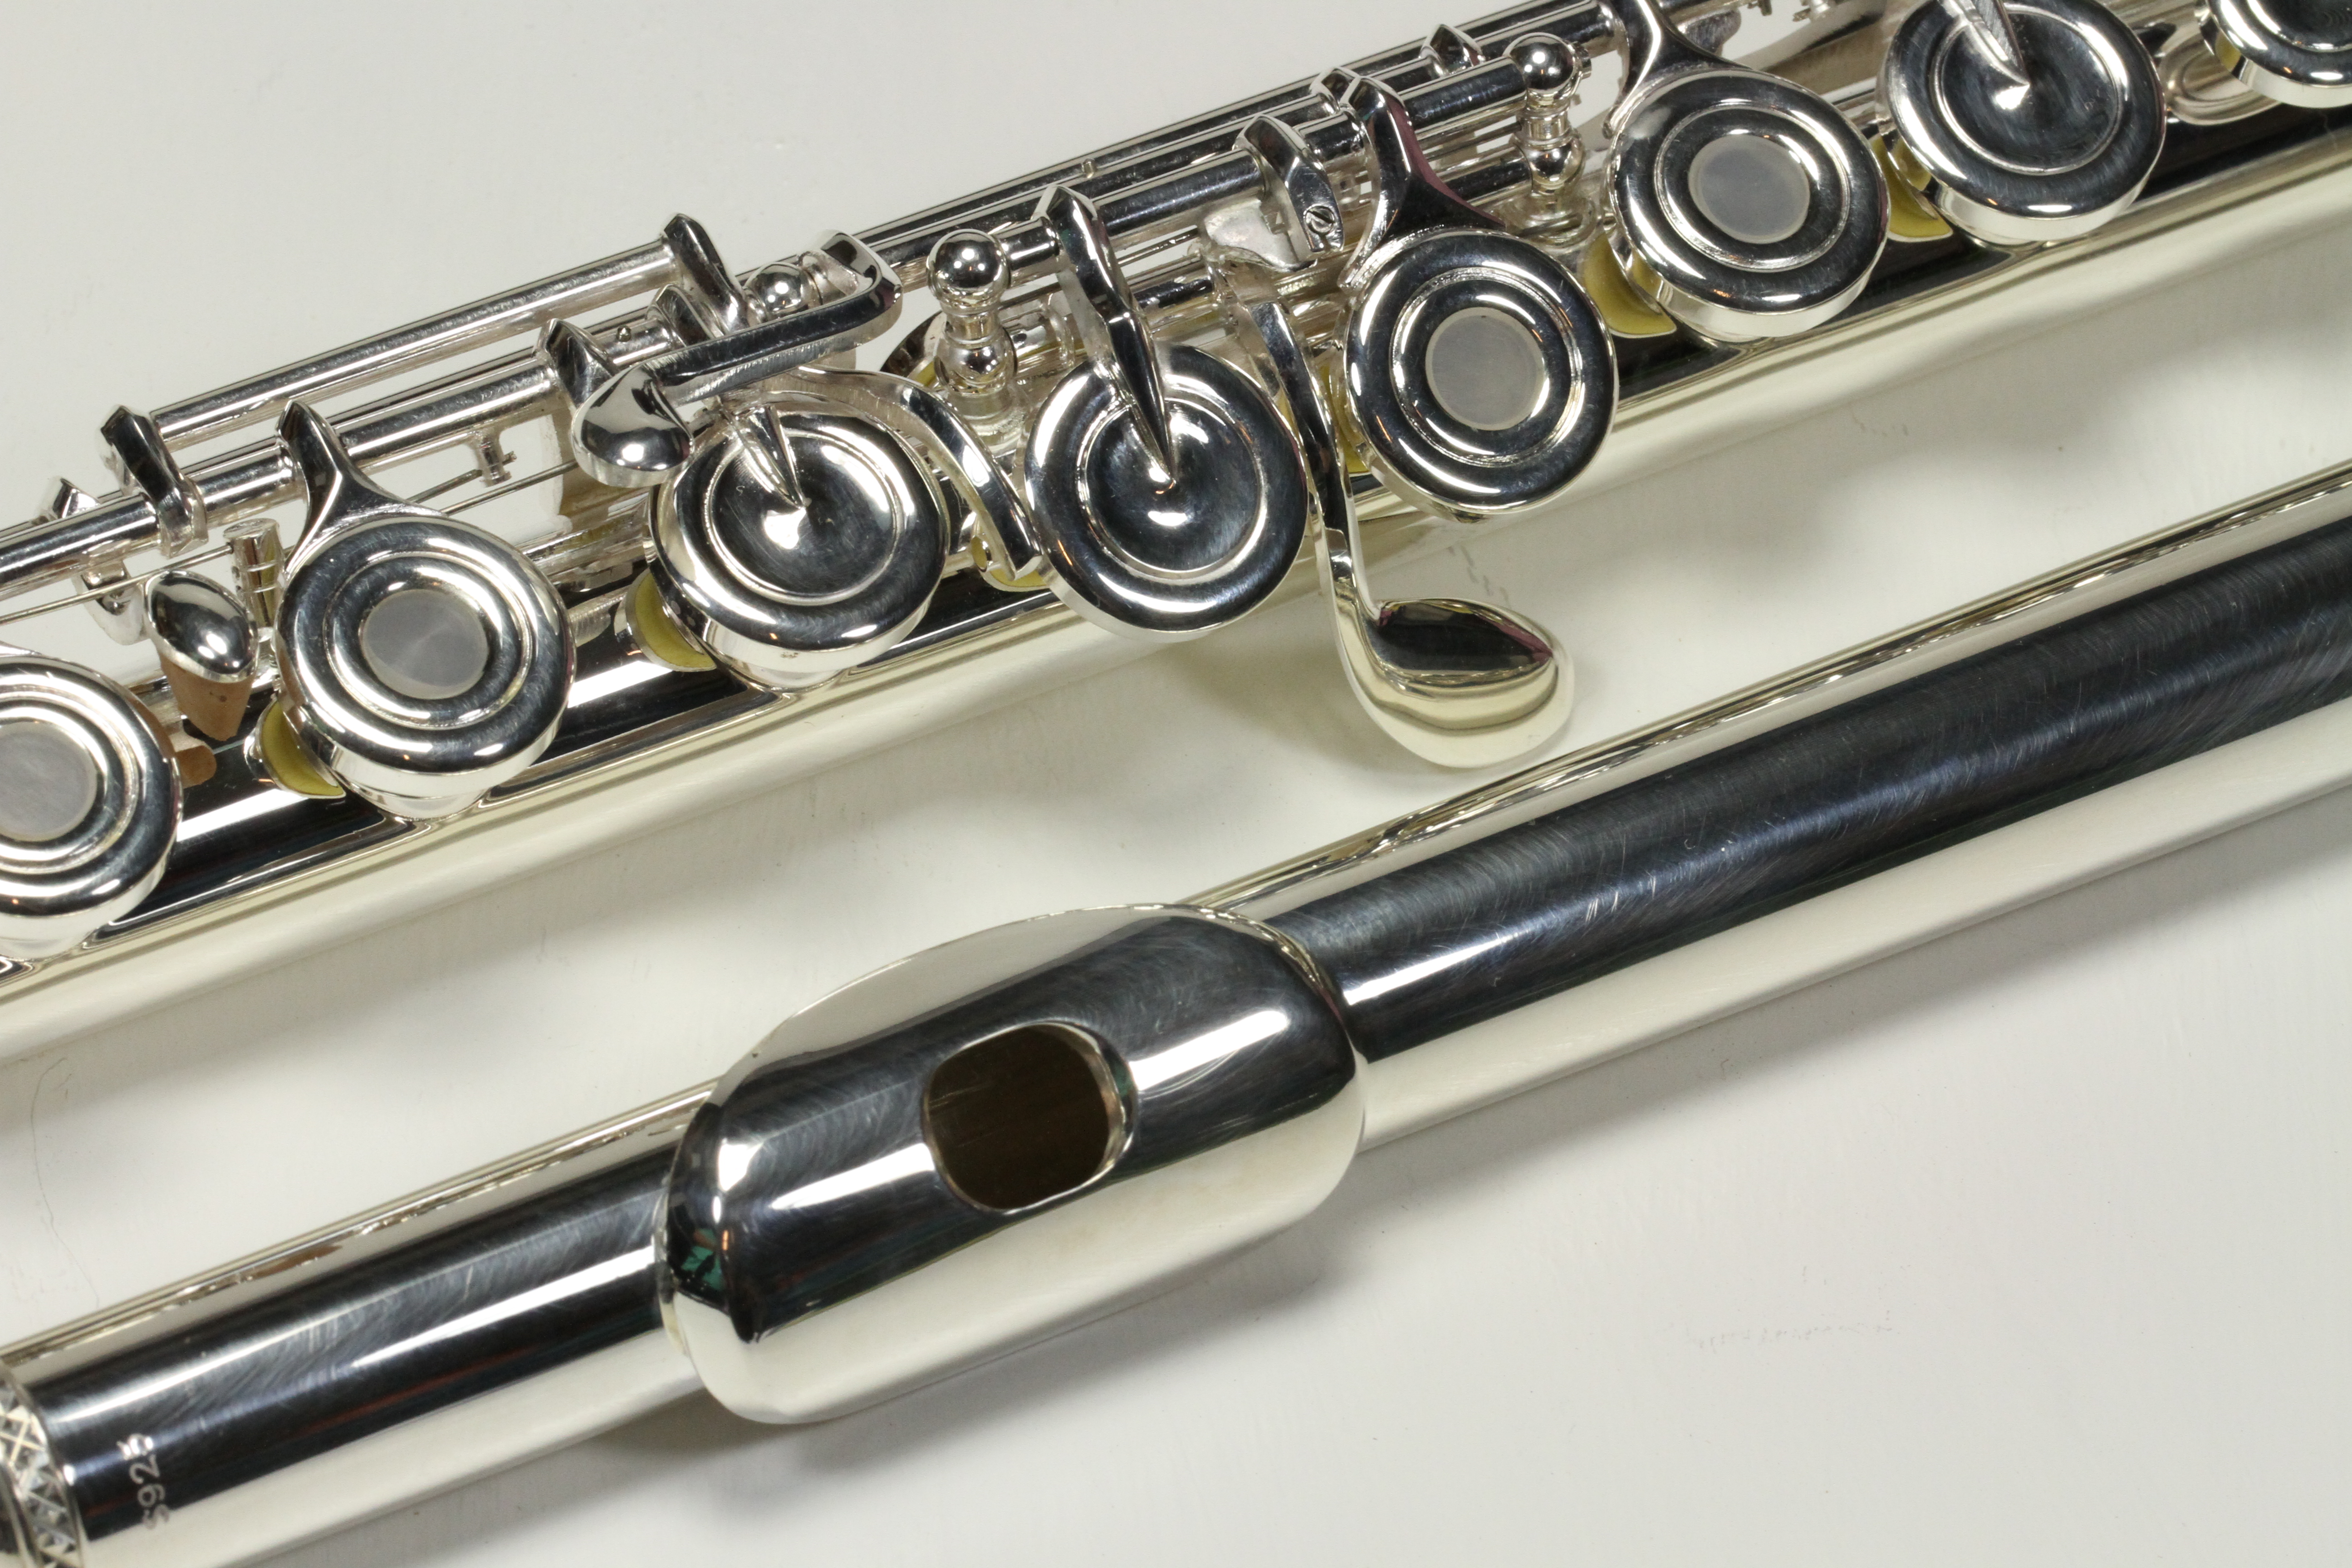 Masterpiece Solid Silver Flute with Open Holes & B Foot Joint | eBay